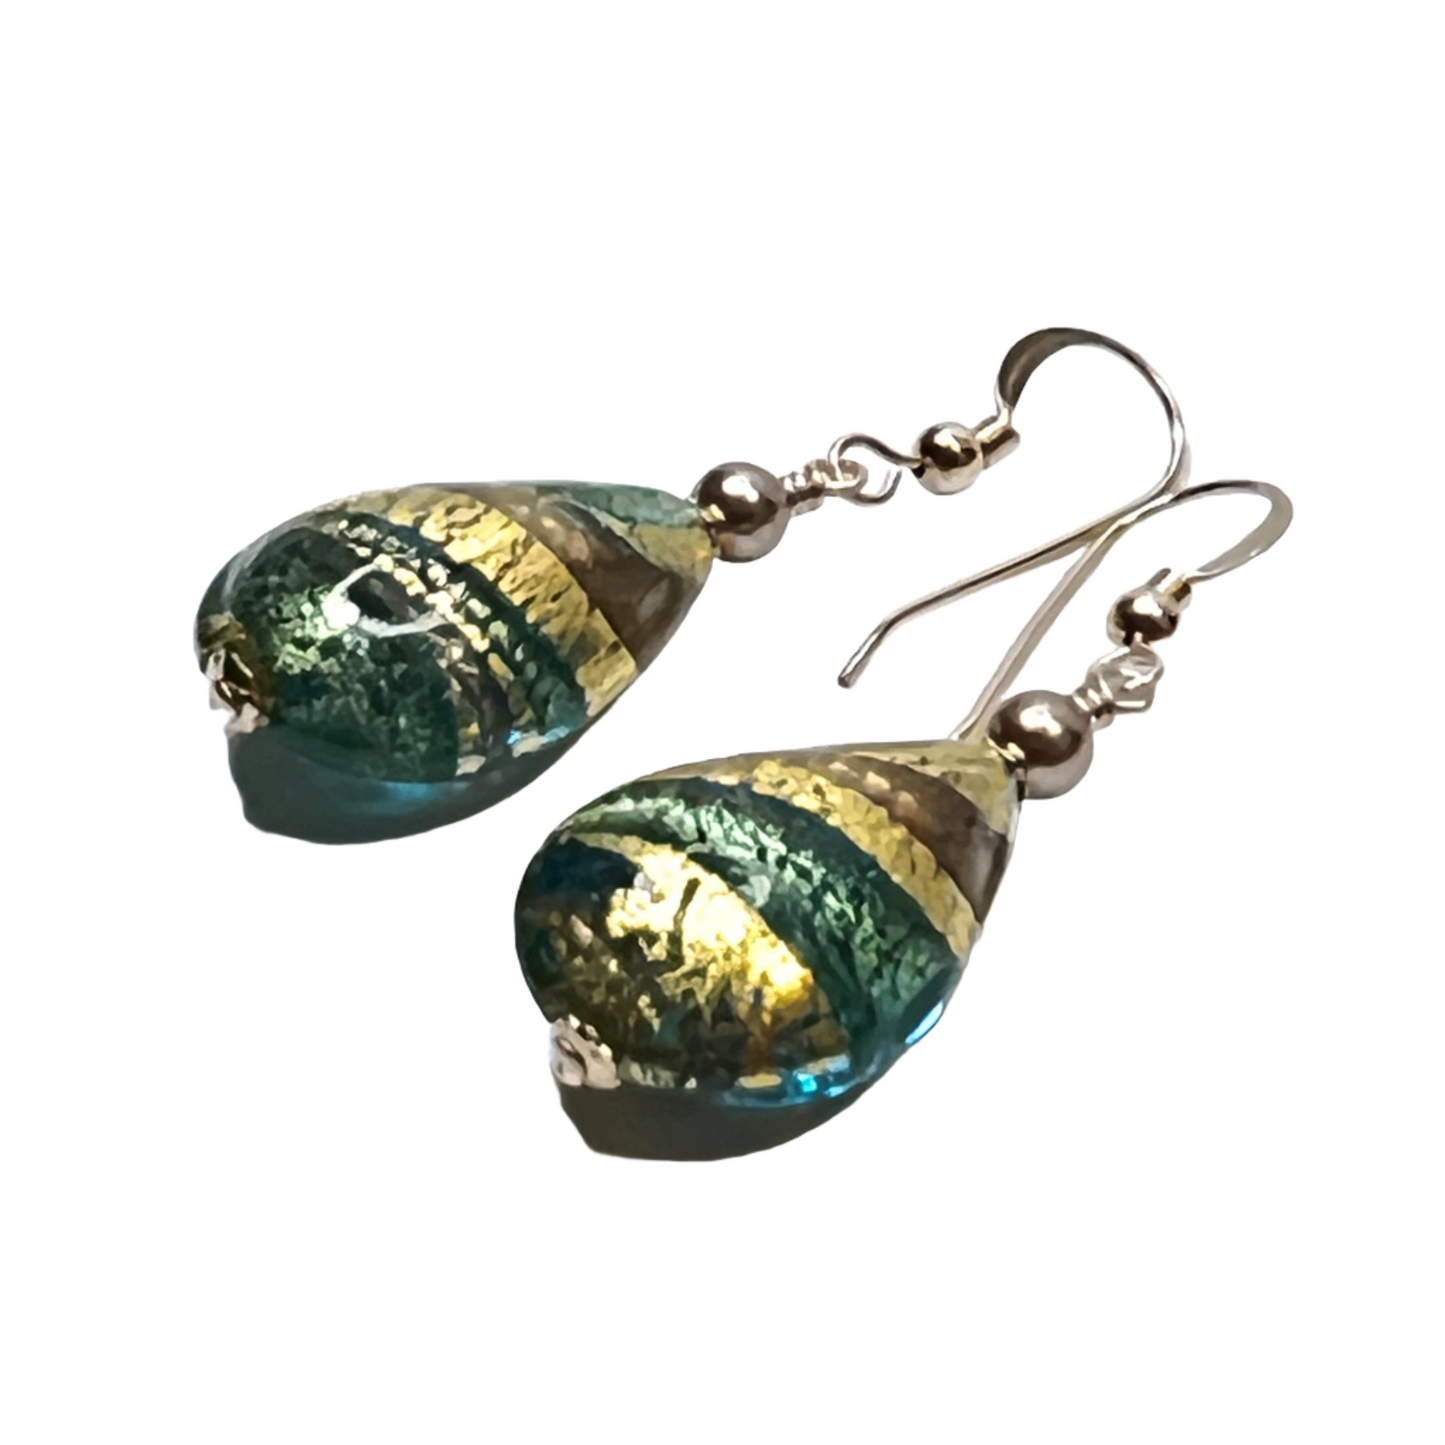 a pair of green and gold earrings